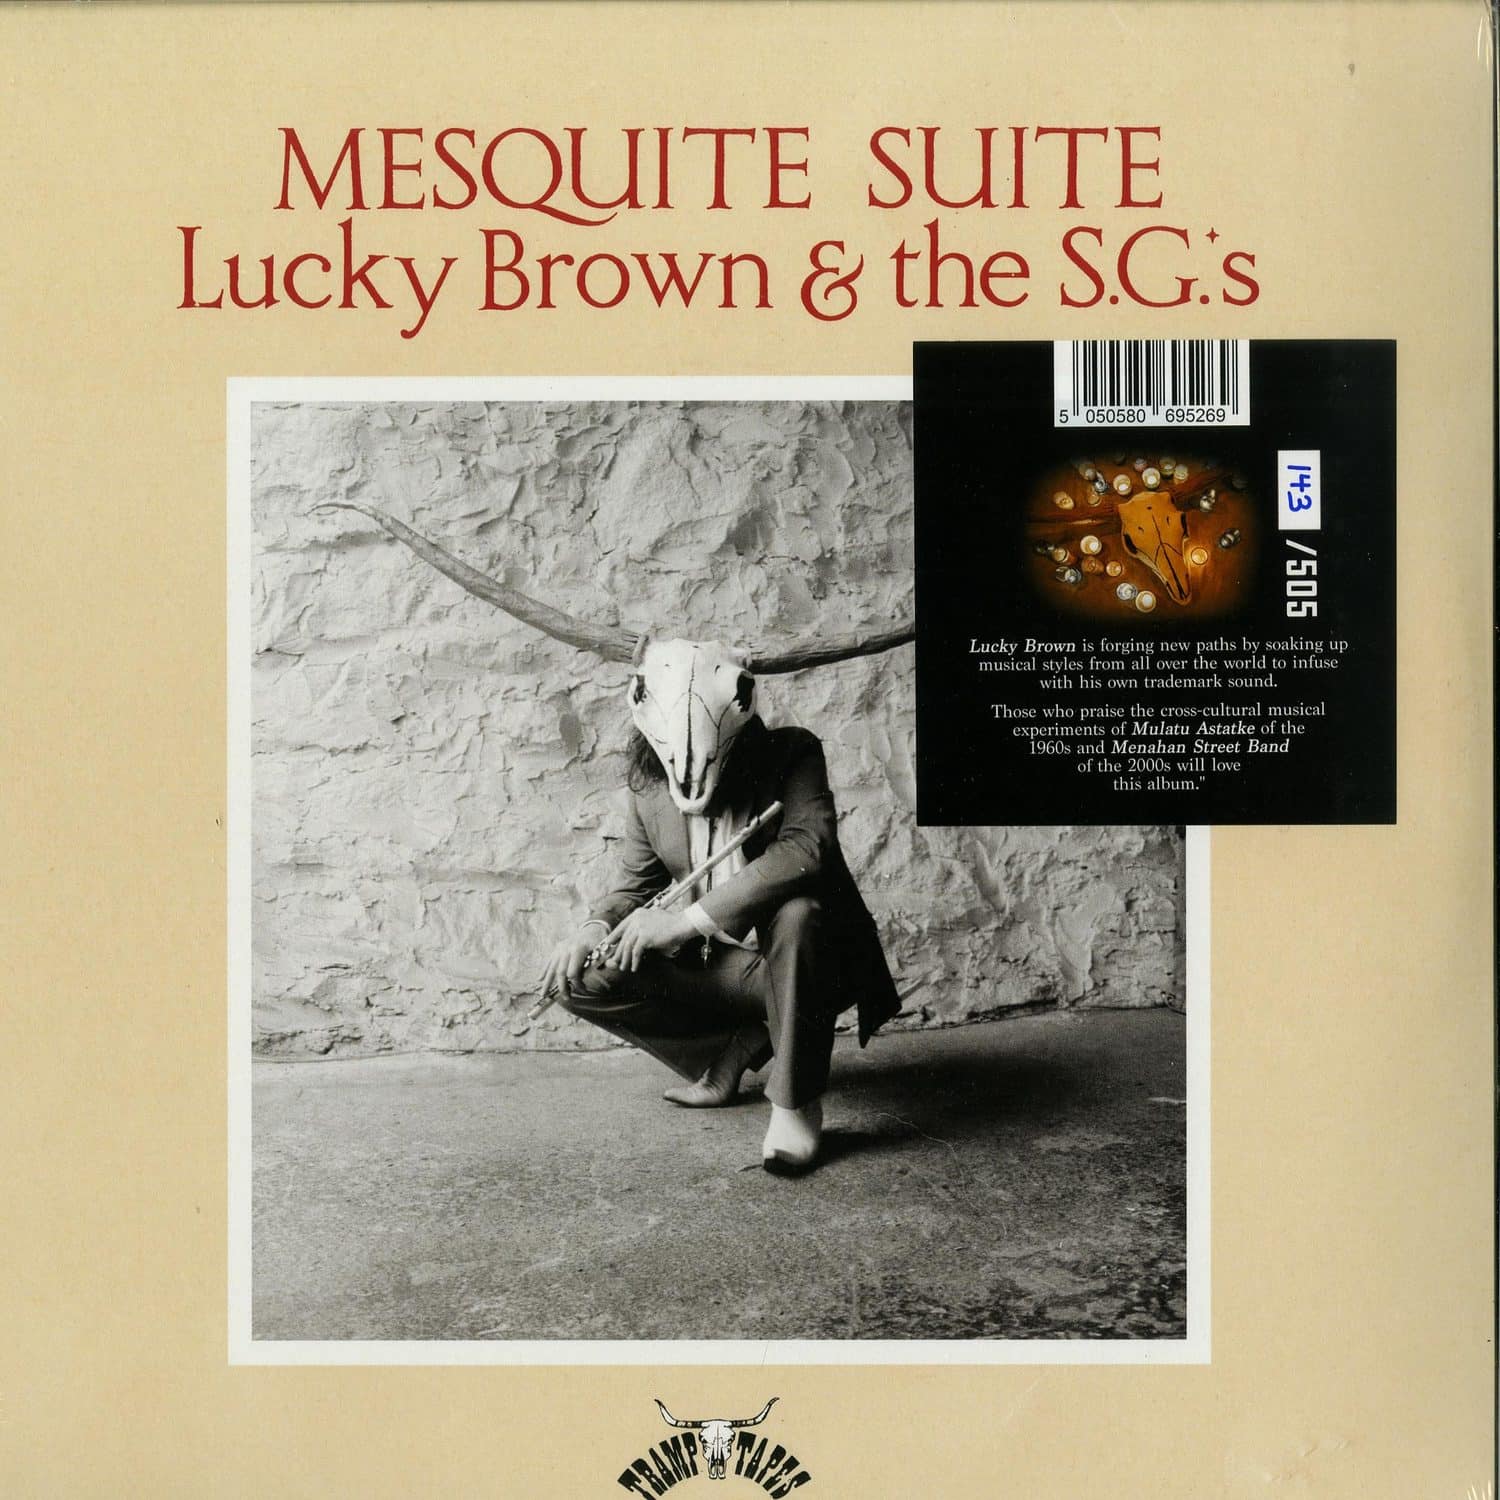 Lucky Brown & The S.G.s - MESQUITE SUITE 